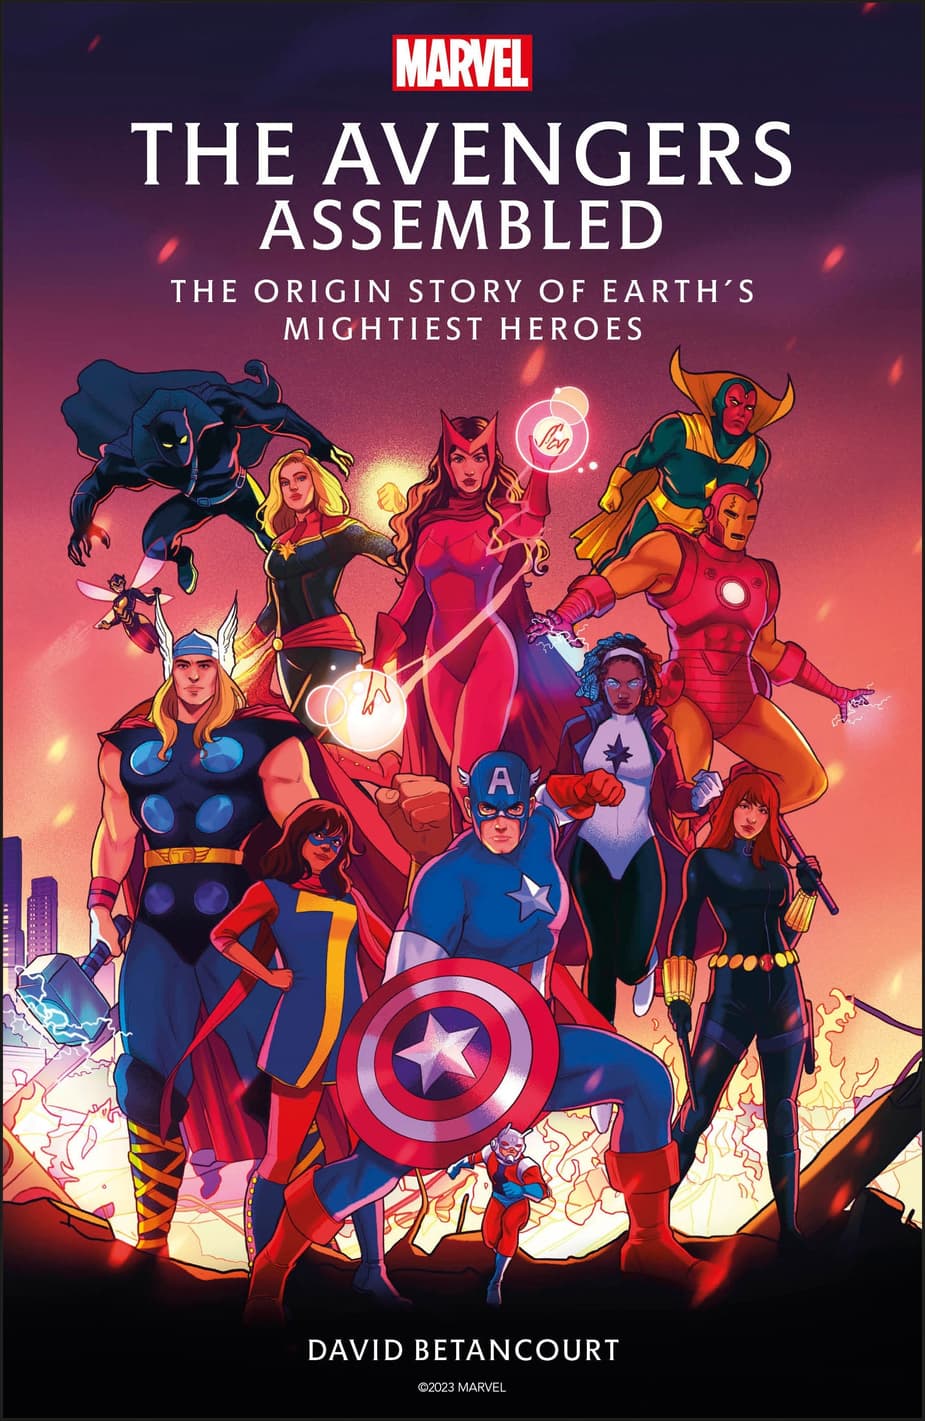 Cover to The Avengers Assembled: The Origin Story of Earth’s Mightiest Heroes.